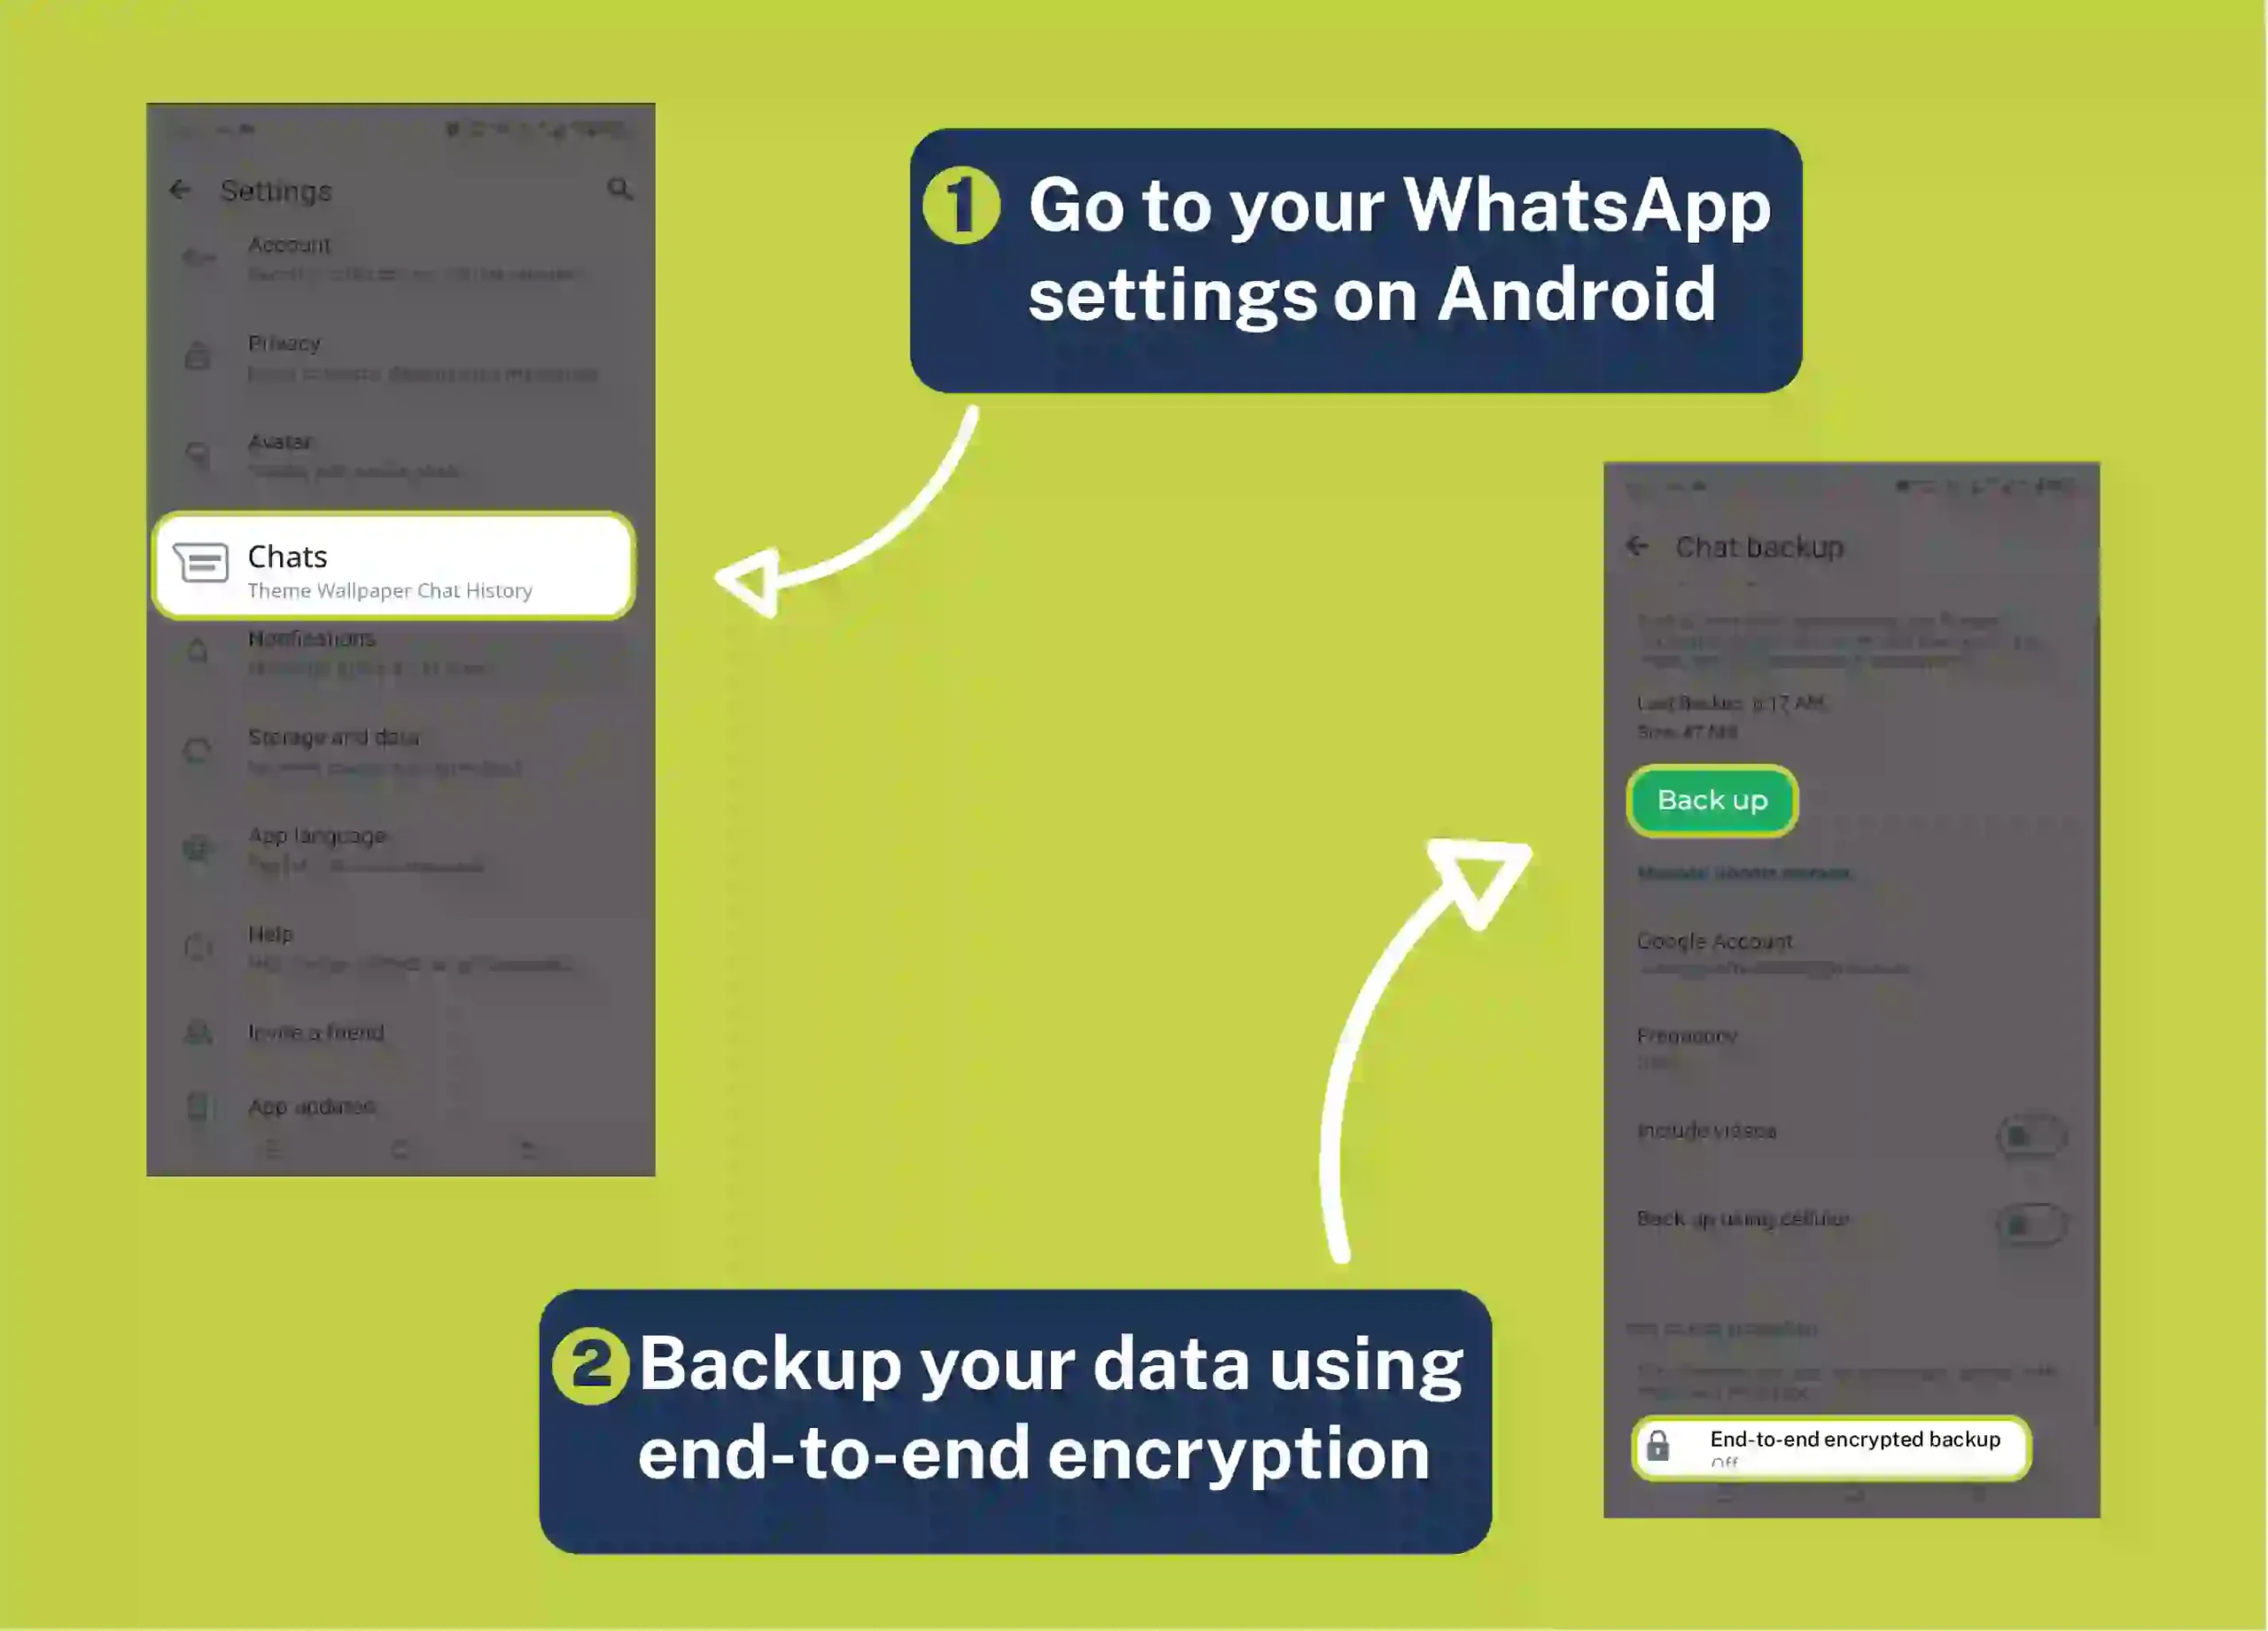 Use WhatsApp encrypted backup key Go to your WhatsApp settings on Android